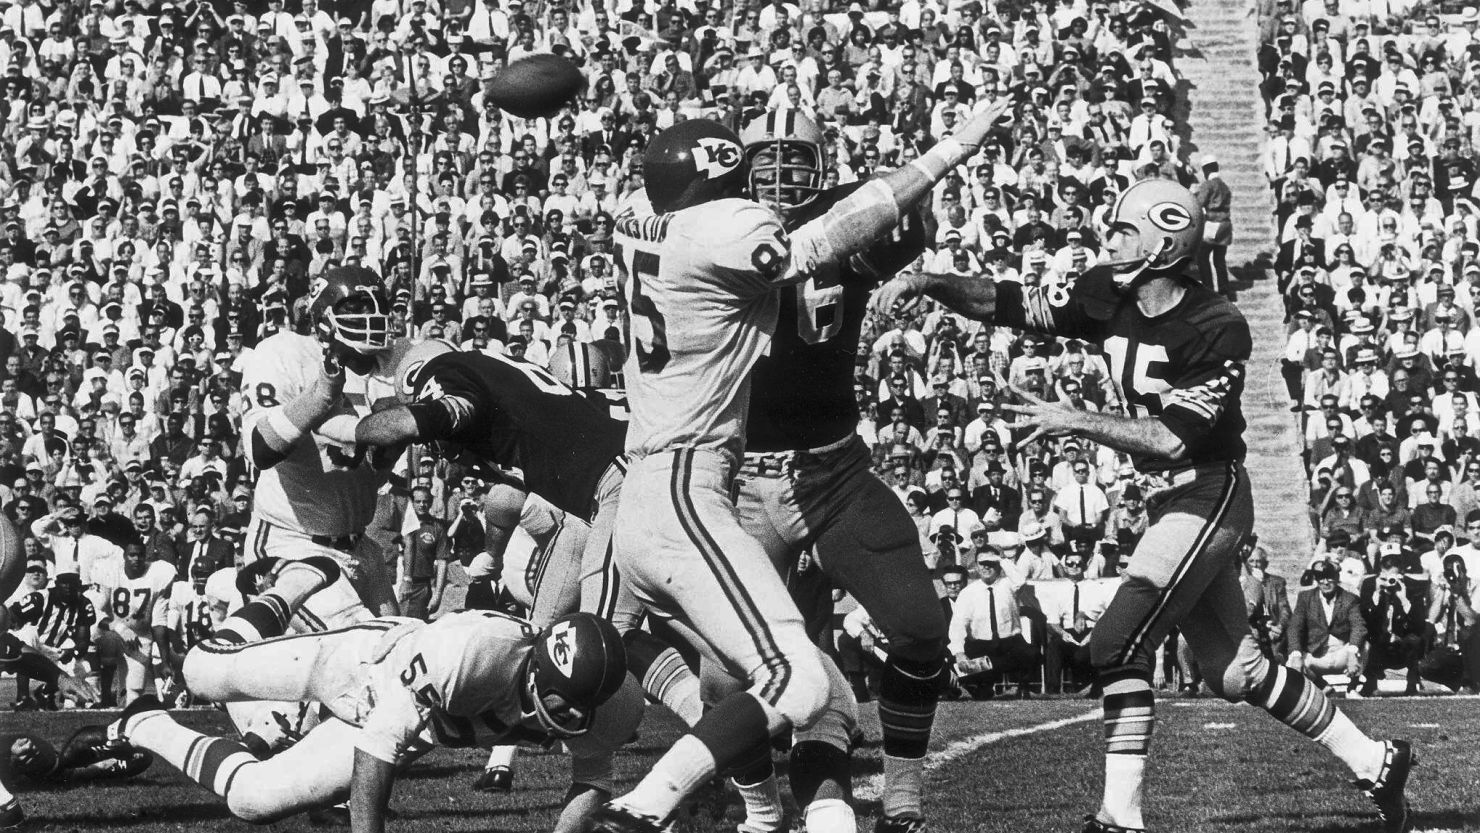 Green Bay Packers quarterback Bart Starr throws a pass during Super Bowl I, at the Los Angeles Coliseum on January 15, 1967.